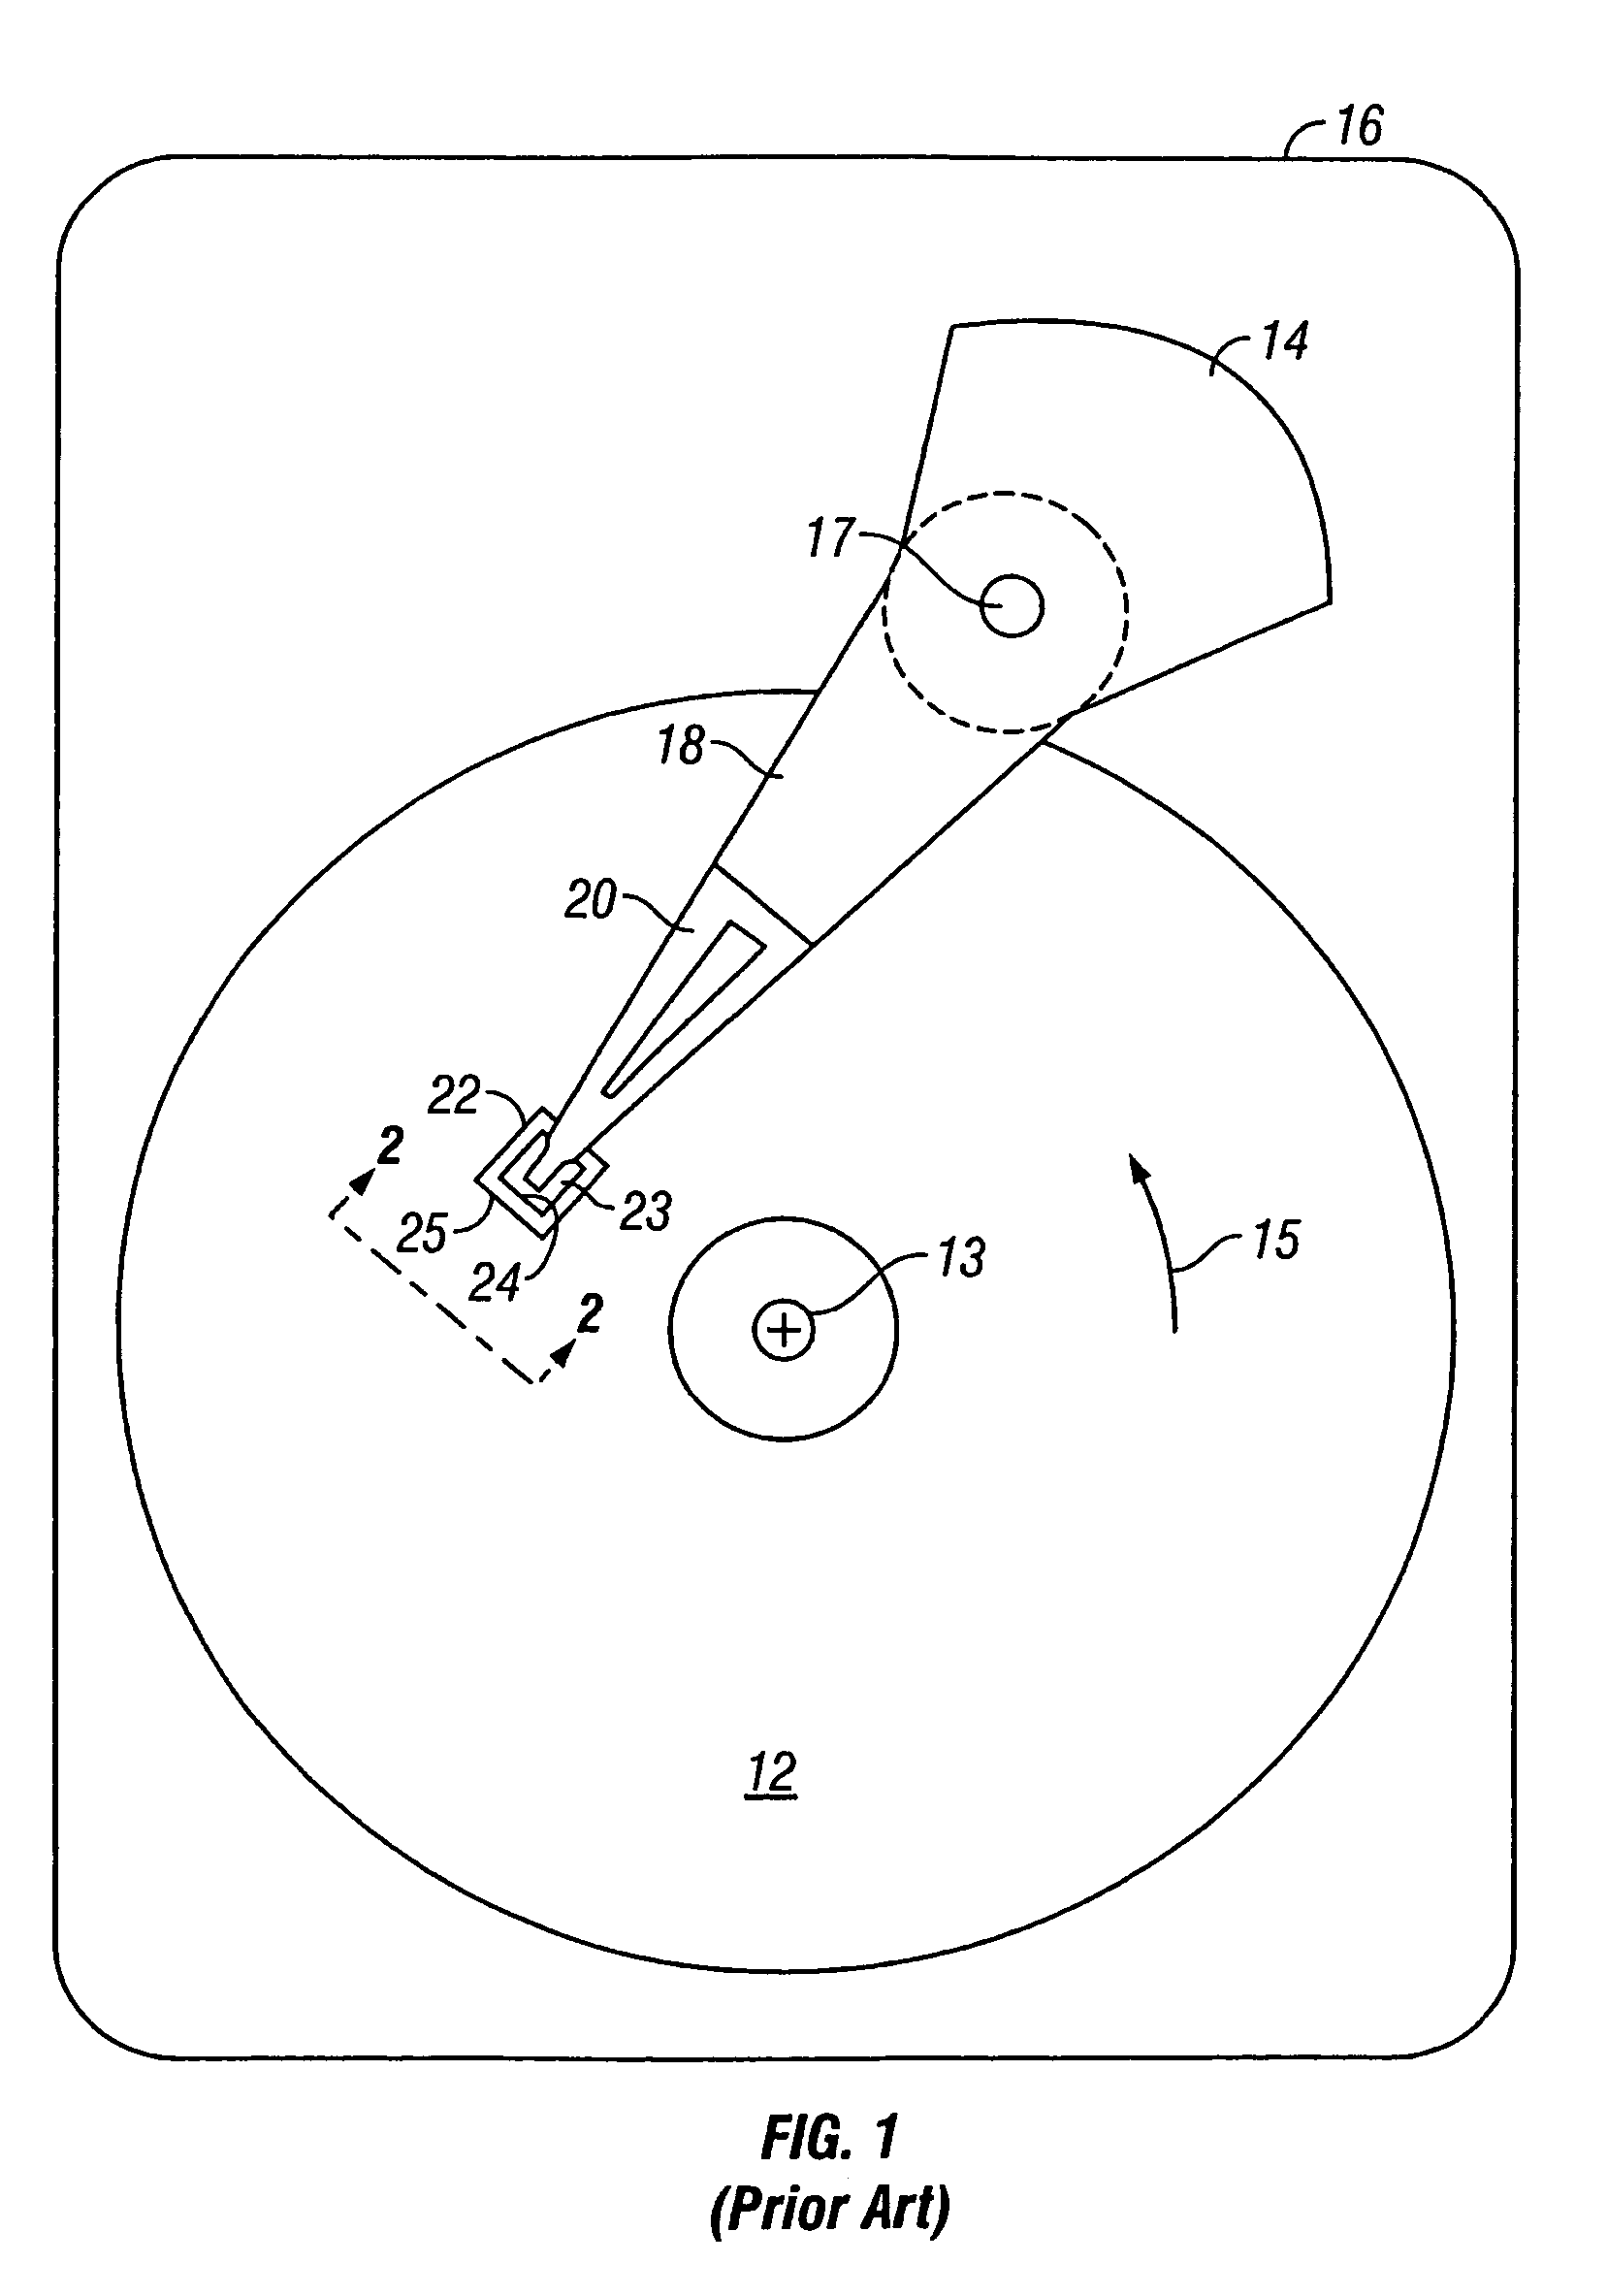 Magnetic recording disk drive with patterned media and circuit for generating timing pulses from the pattern